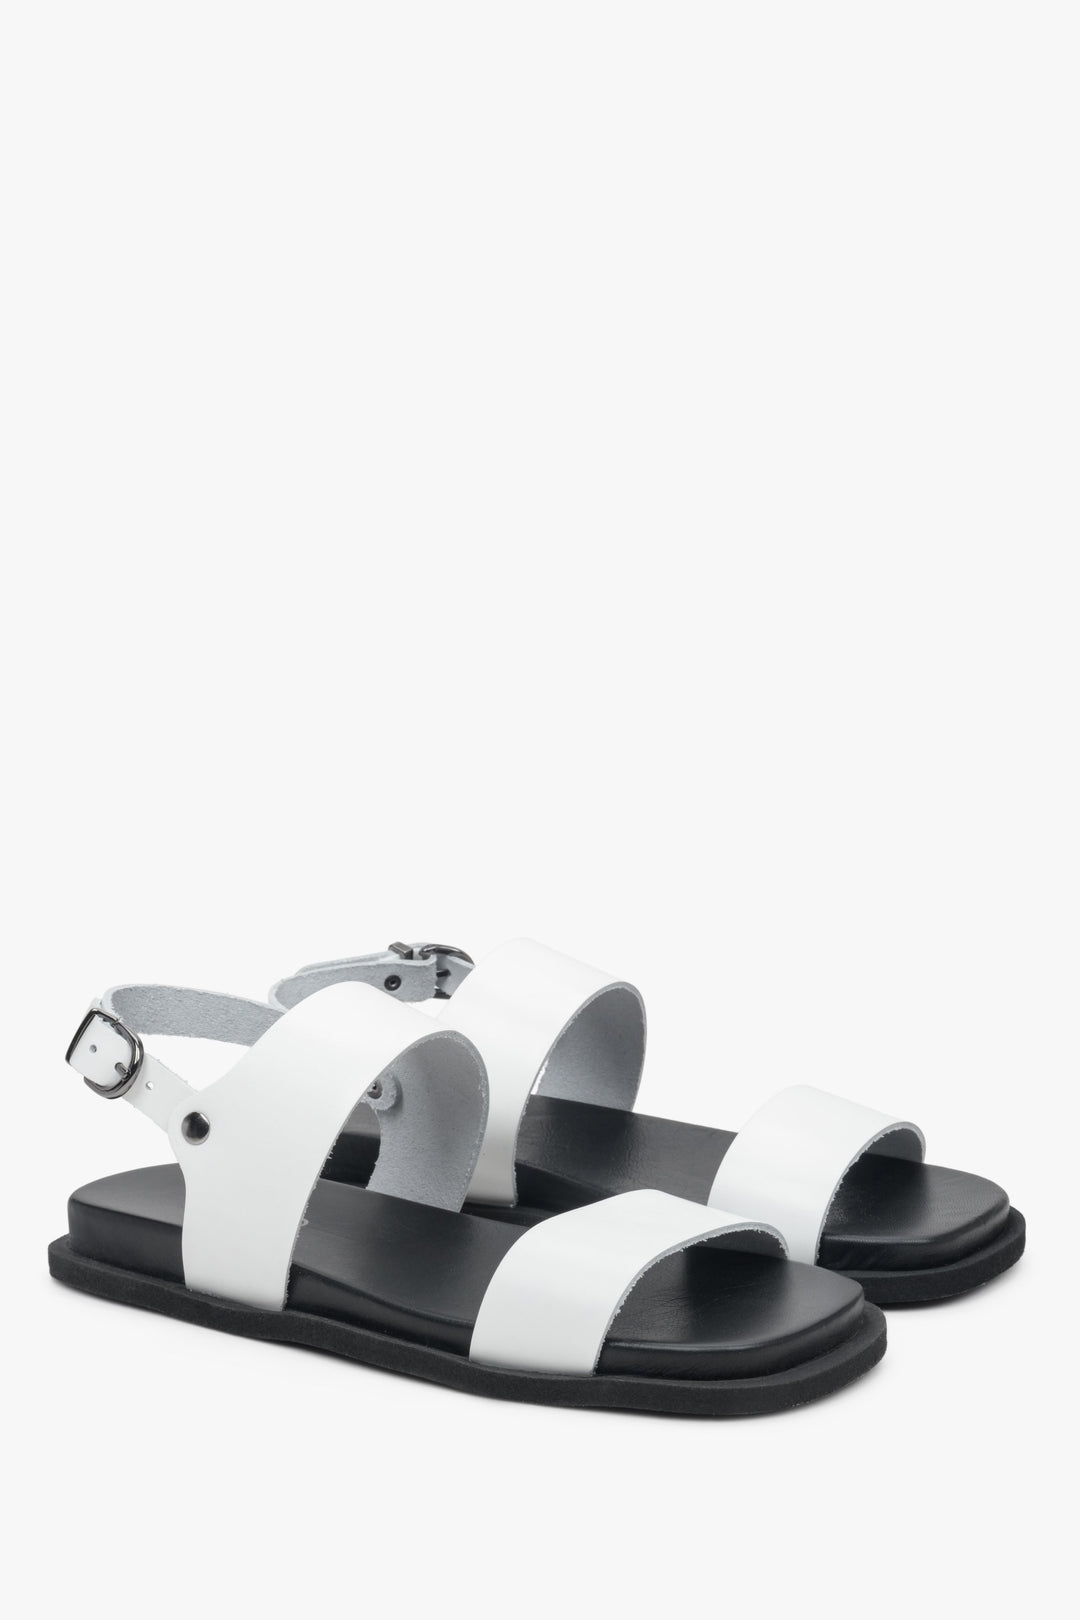 Women's white sandals on a black flat sole made of natural leather Estro.